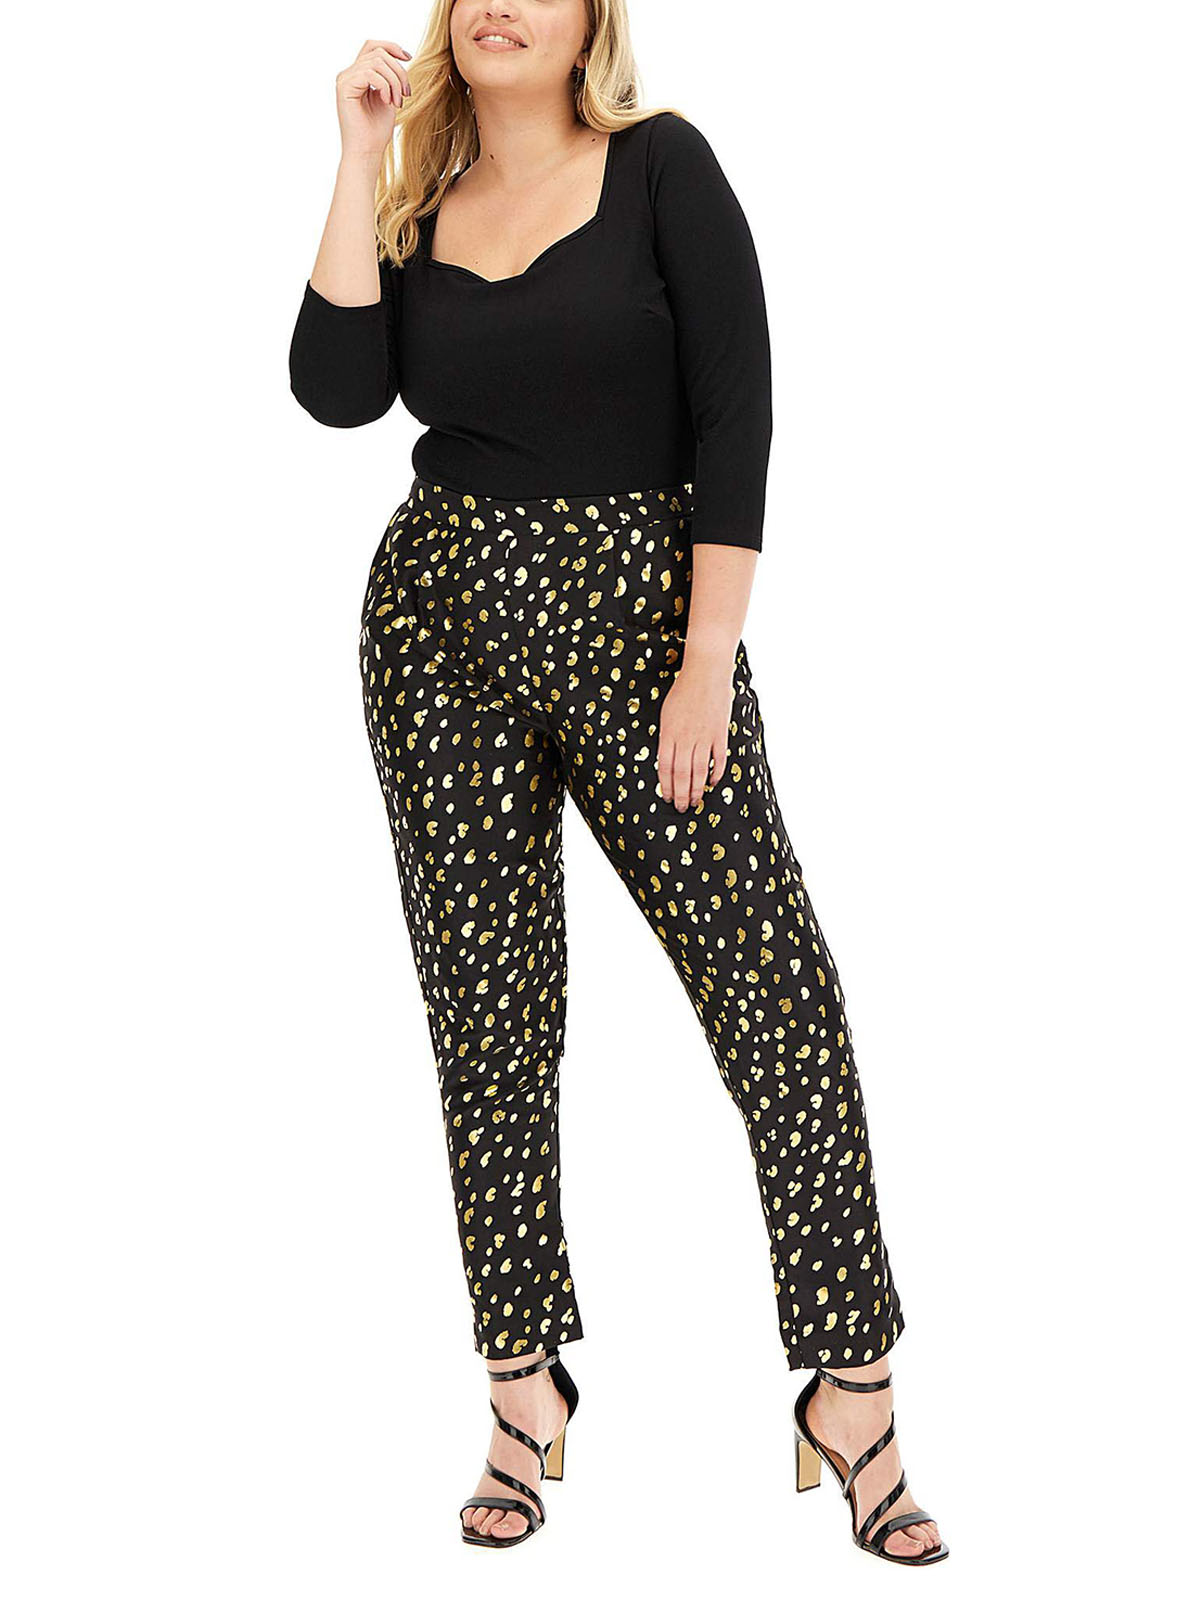 Faballey Trousers and Pants  Buy Faballey Pink High Waist Tapered Trousers  Online  Nykaa Fashion